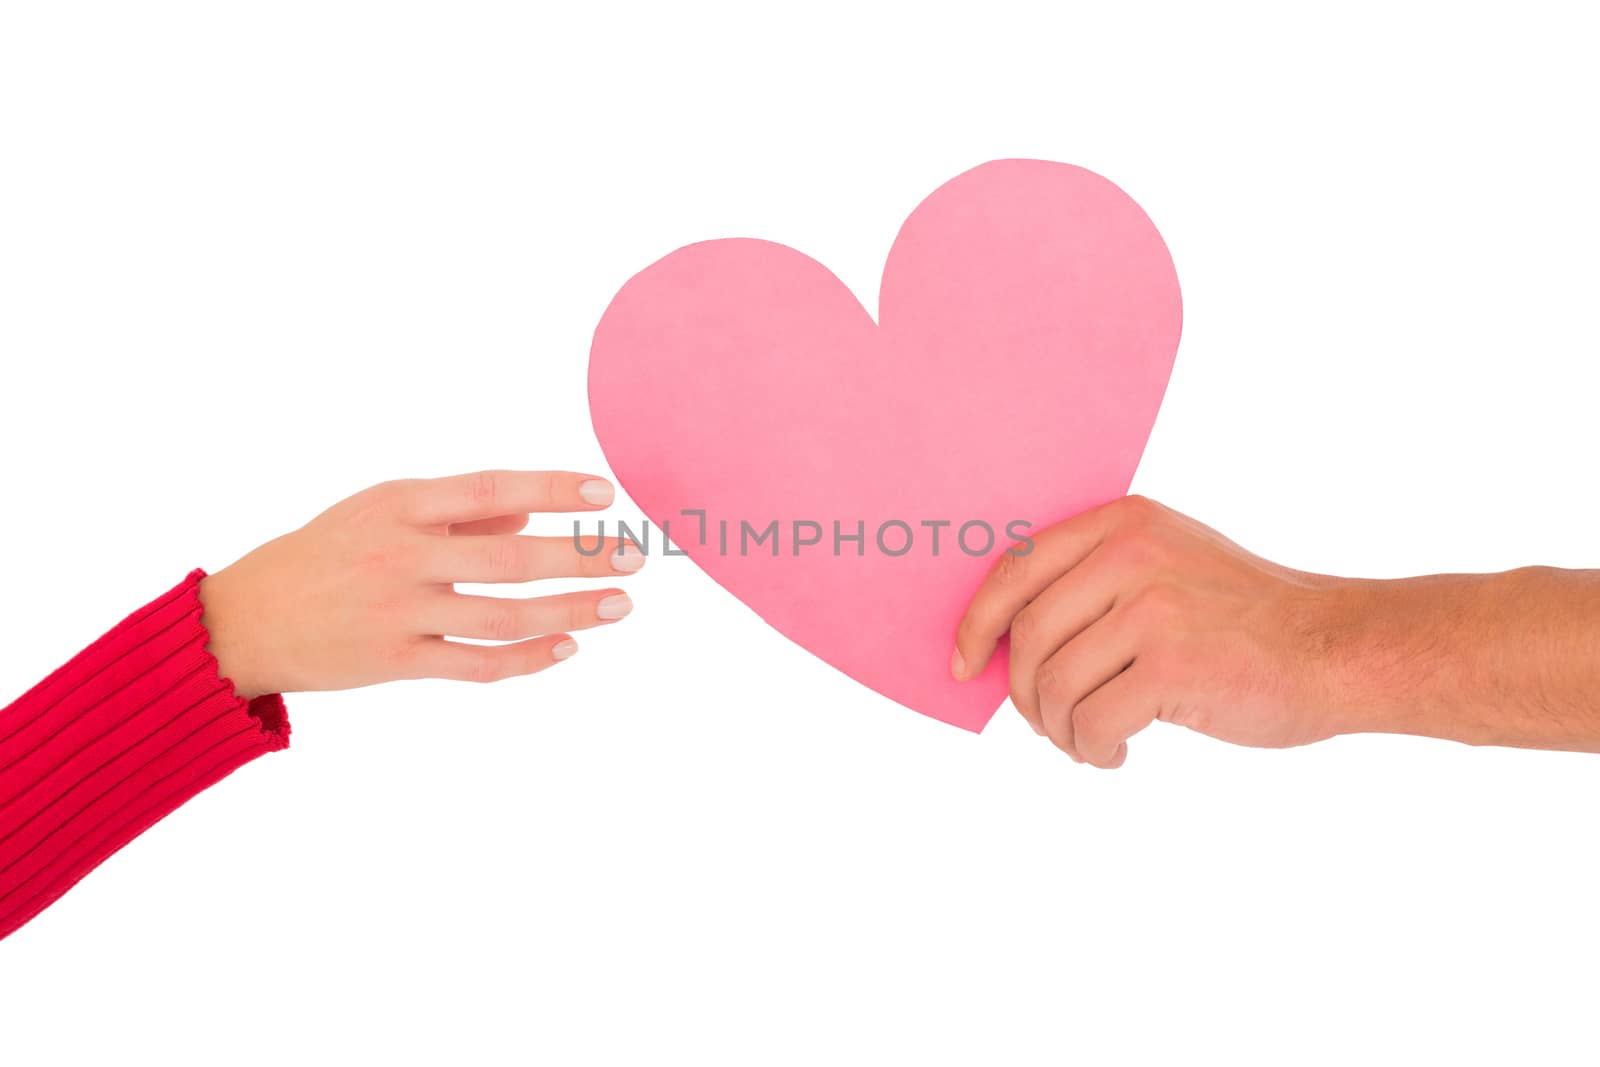 Couple passing a paper heart on white background